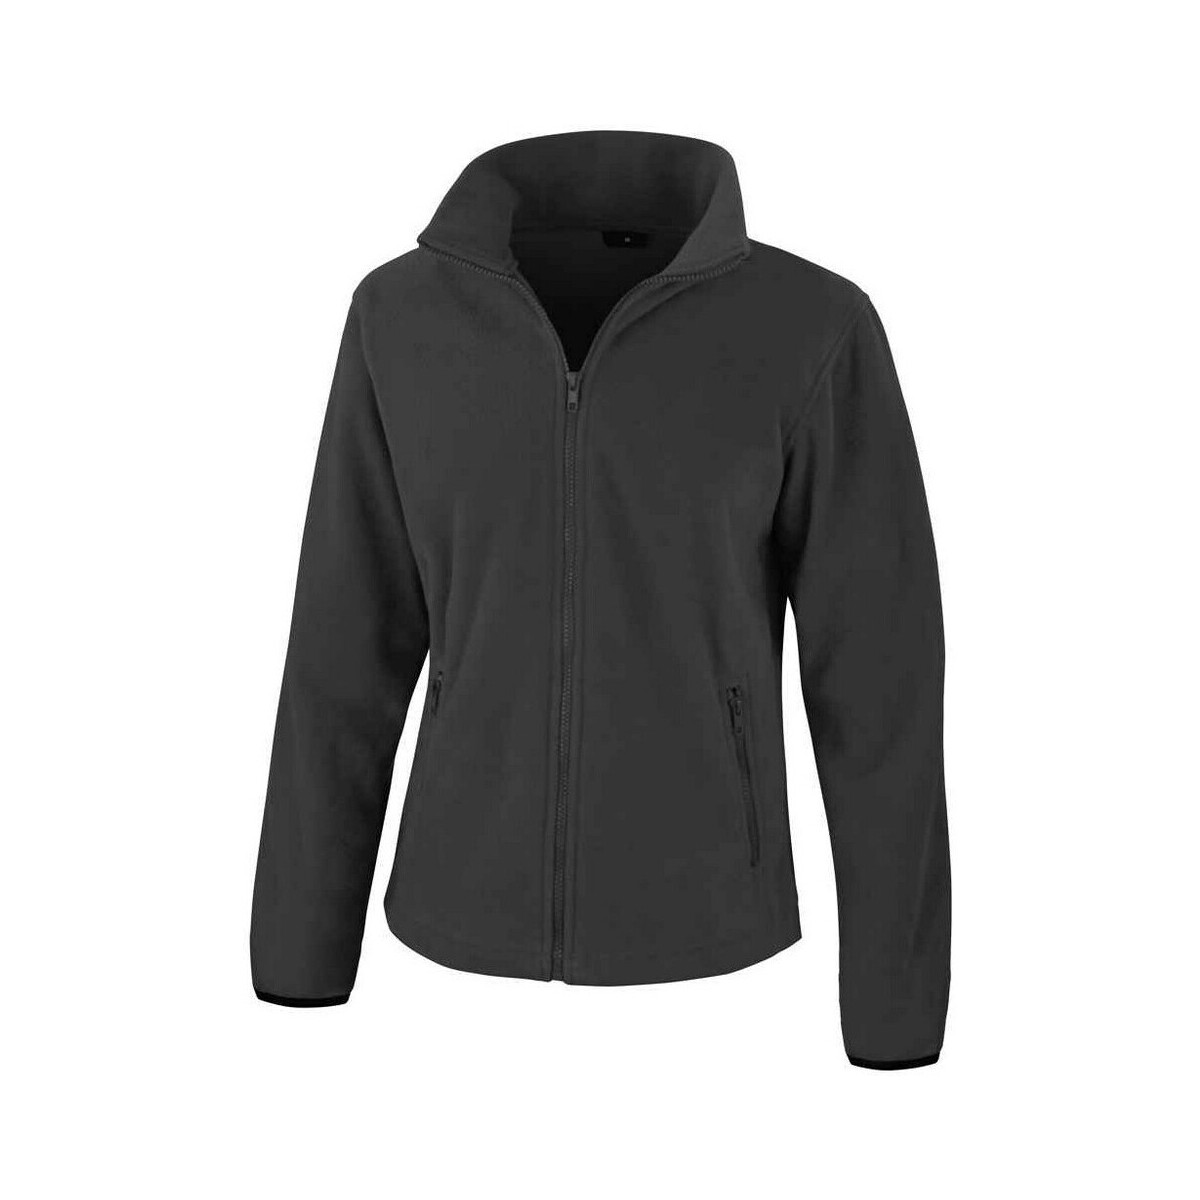 textil Mujer cazadoras Result Core Norse Negro